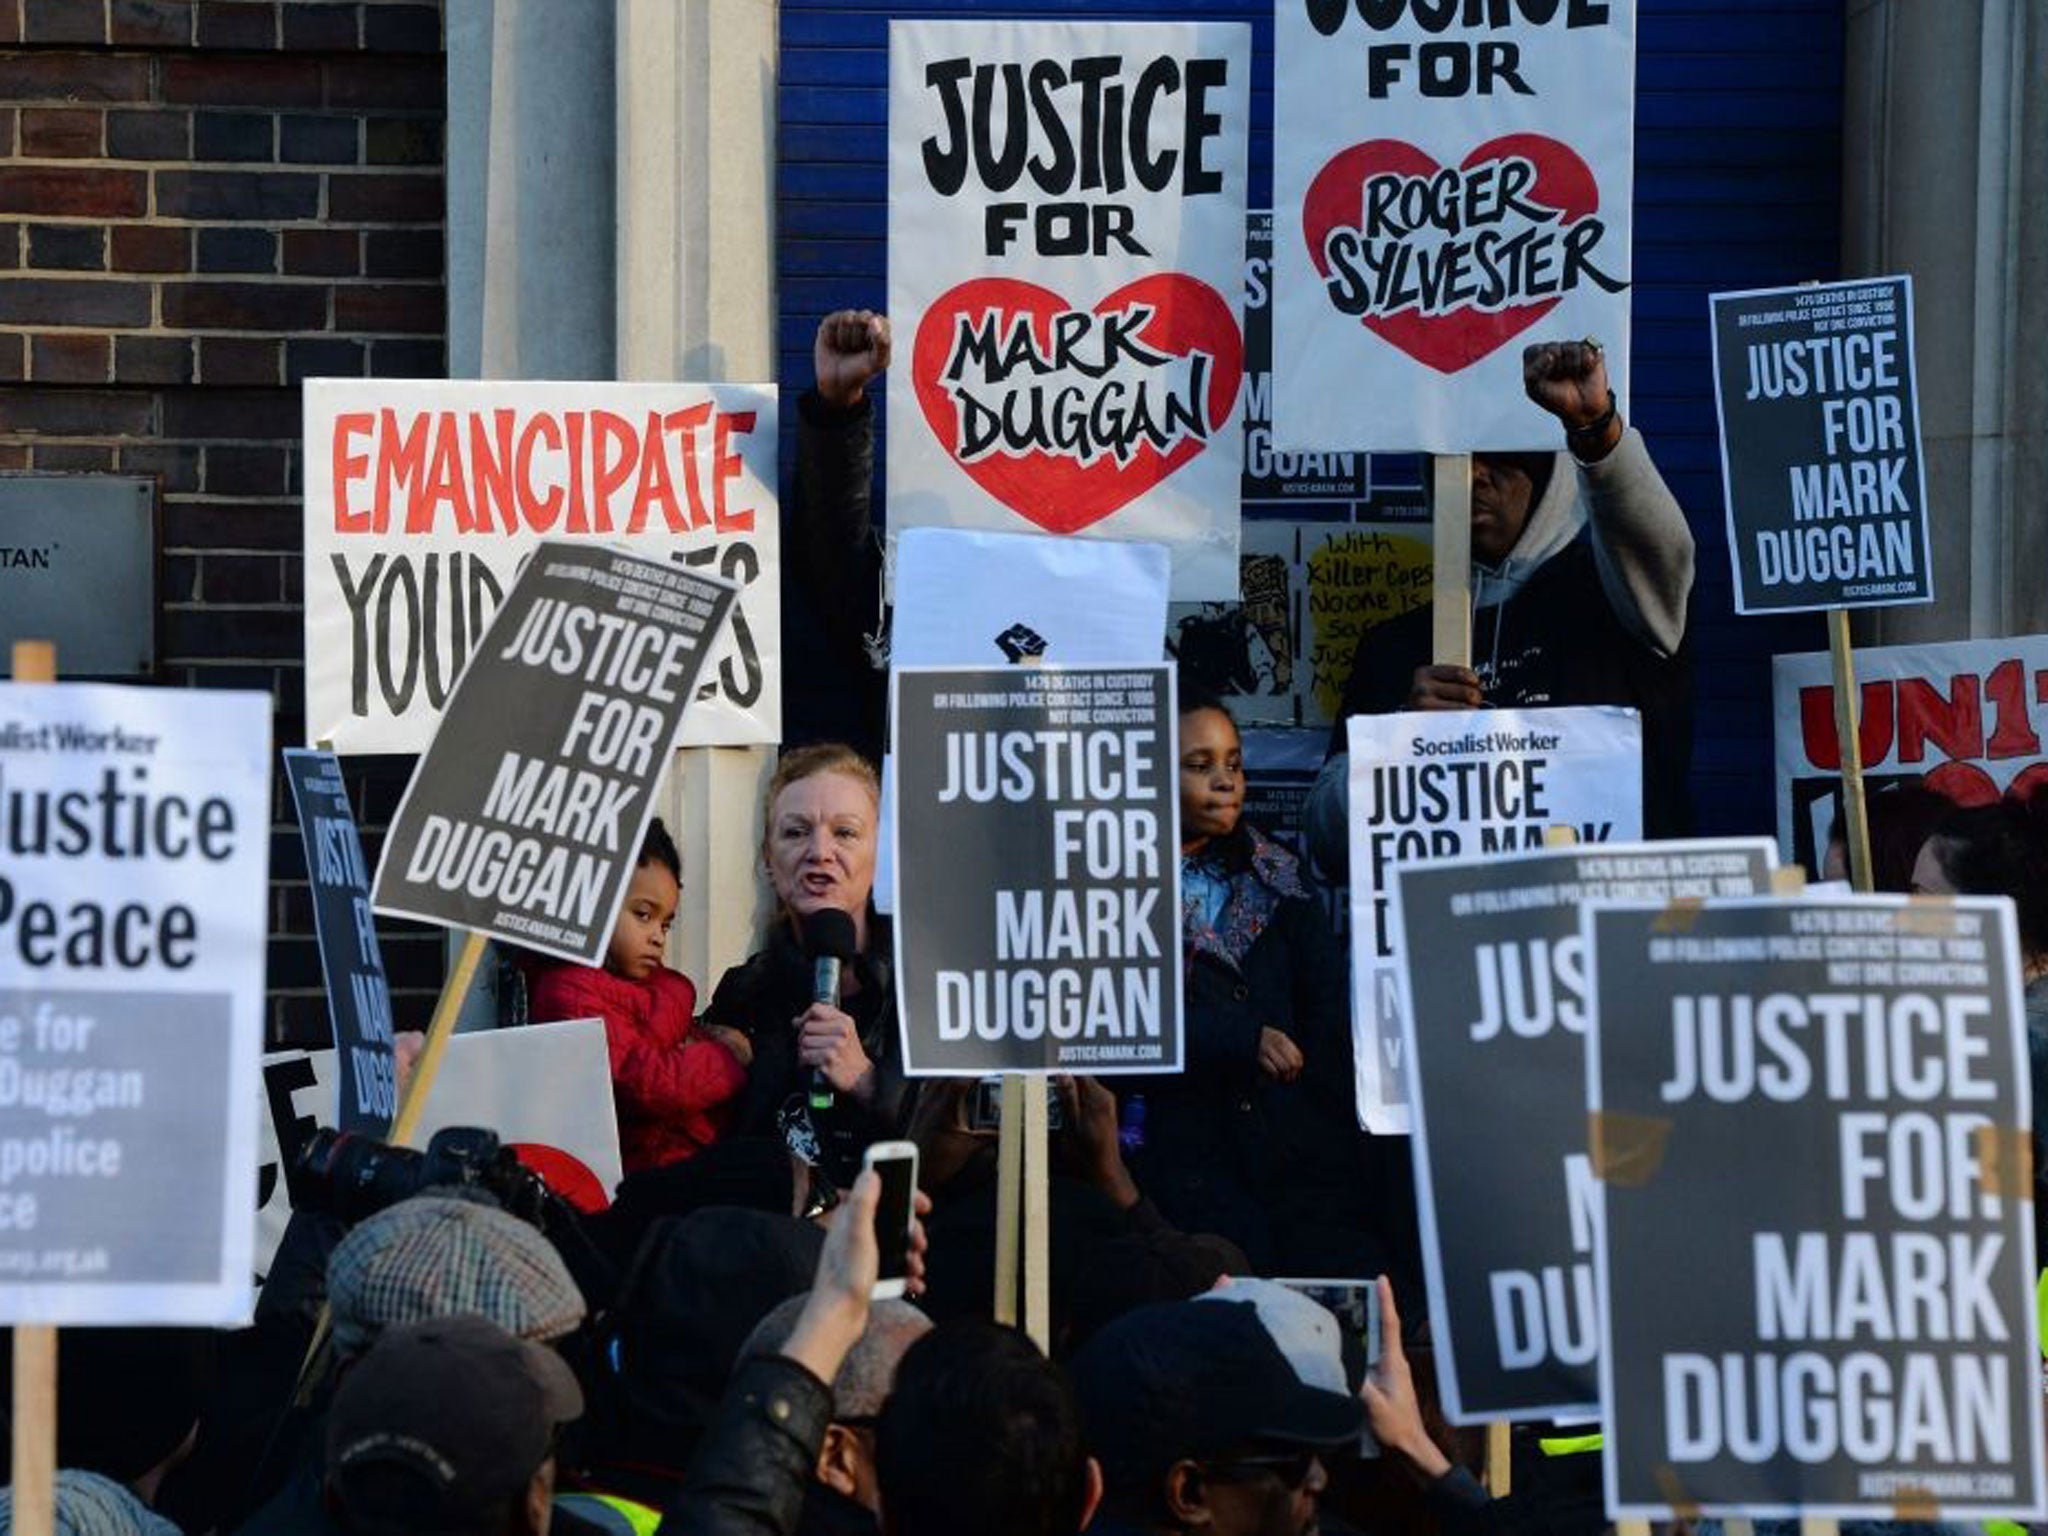 Carole Duggan (L), aunt of Mark Duggan who was shot dead by police, addresses the gathering outside Tottenham Police Station in London on 11 January, 2014,